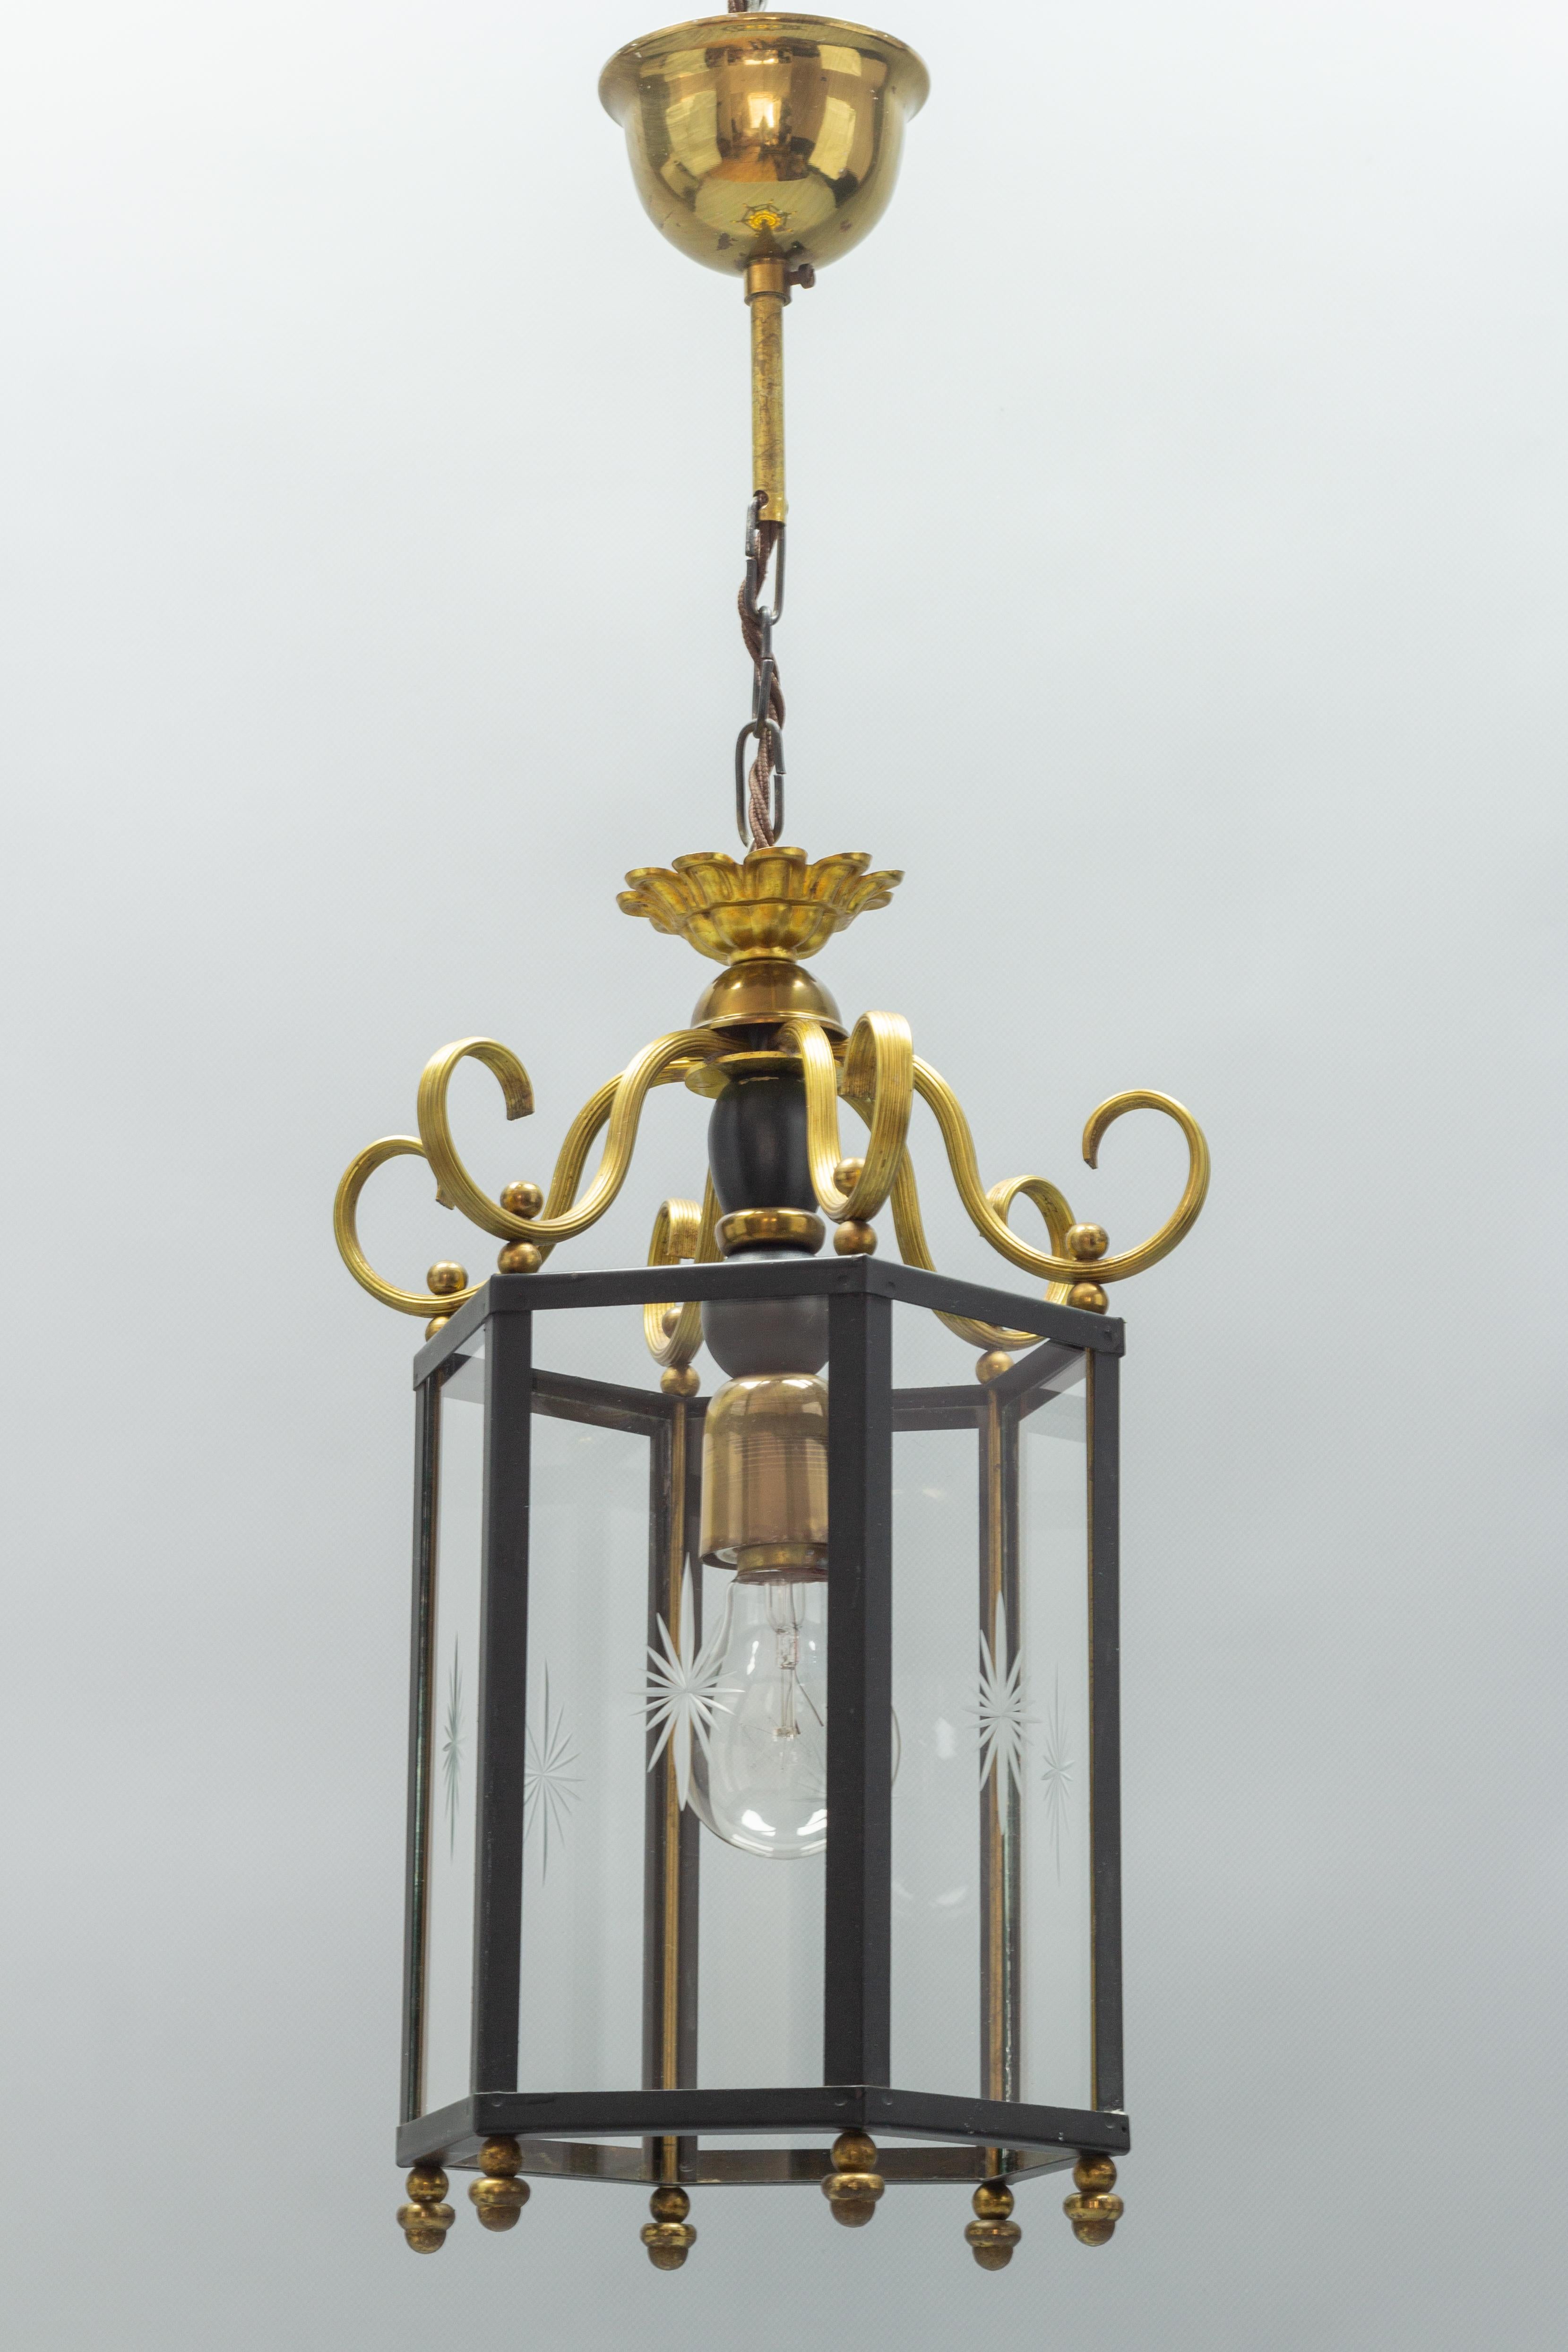 Beautiful French mid-20th century neoclassical style single light interior hanging lantern with six glass panels. Each of the six glass panels has a cut starburst decor.
One socket for E27 (E26) size light bulb.
Dimensions: height: 61 cm / 24.01 in;